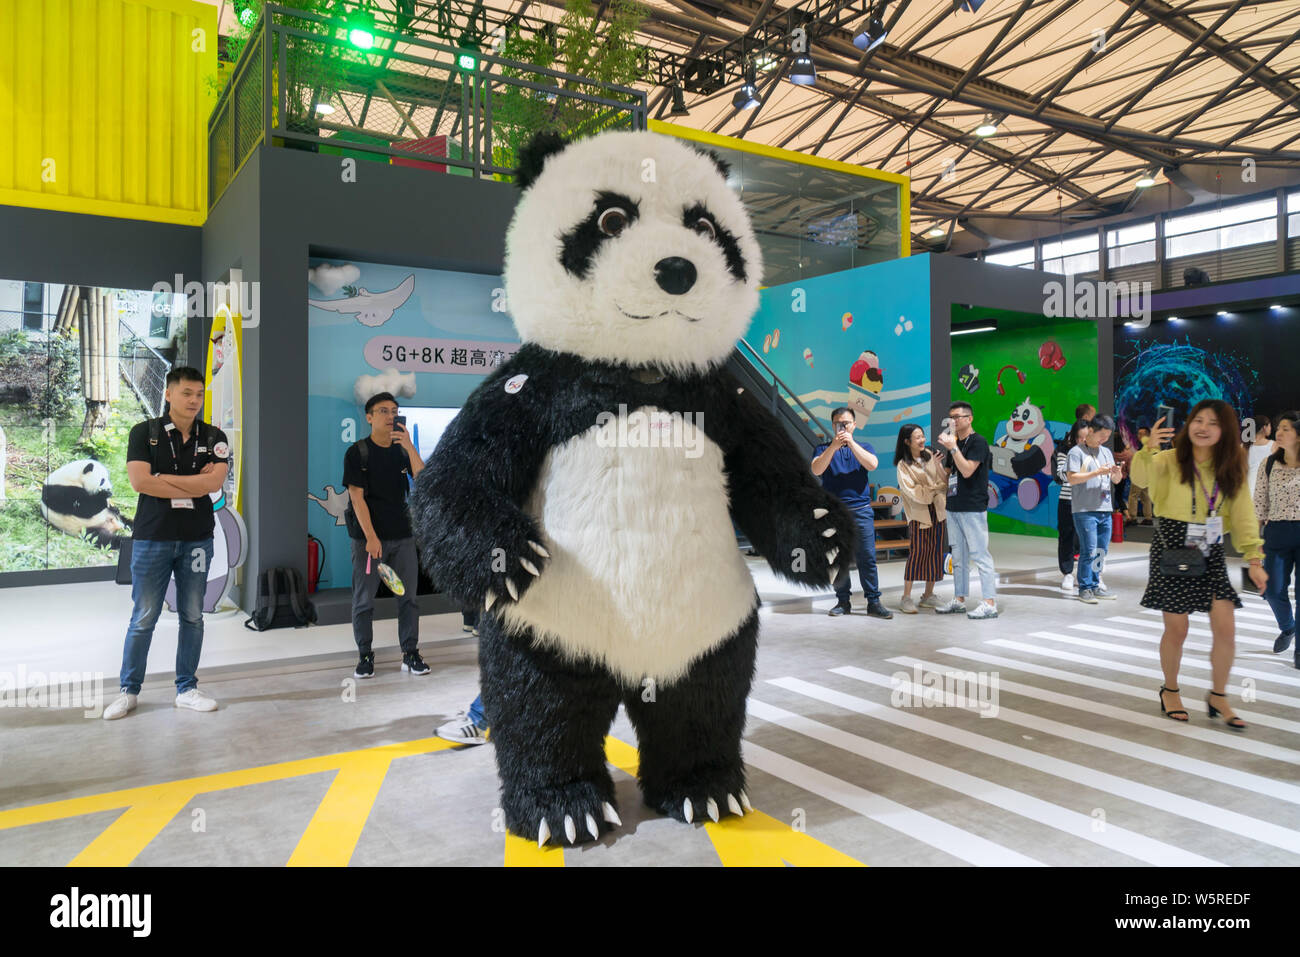 A Chinese worker dressed in giant panda costumes poses during the 2019 Mobile World Congress (MWC) in Shanghai, China, 26 June 2019. Stock Photo